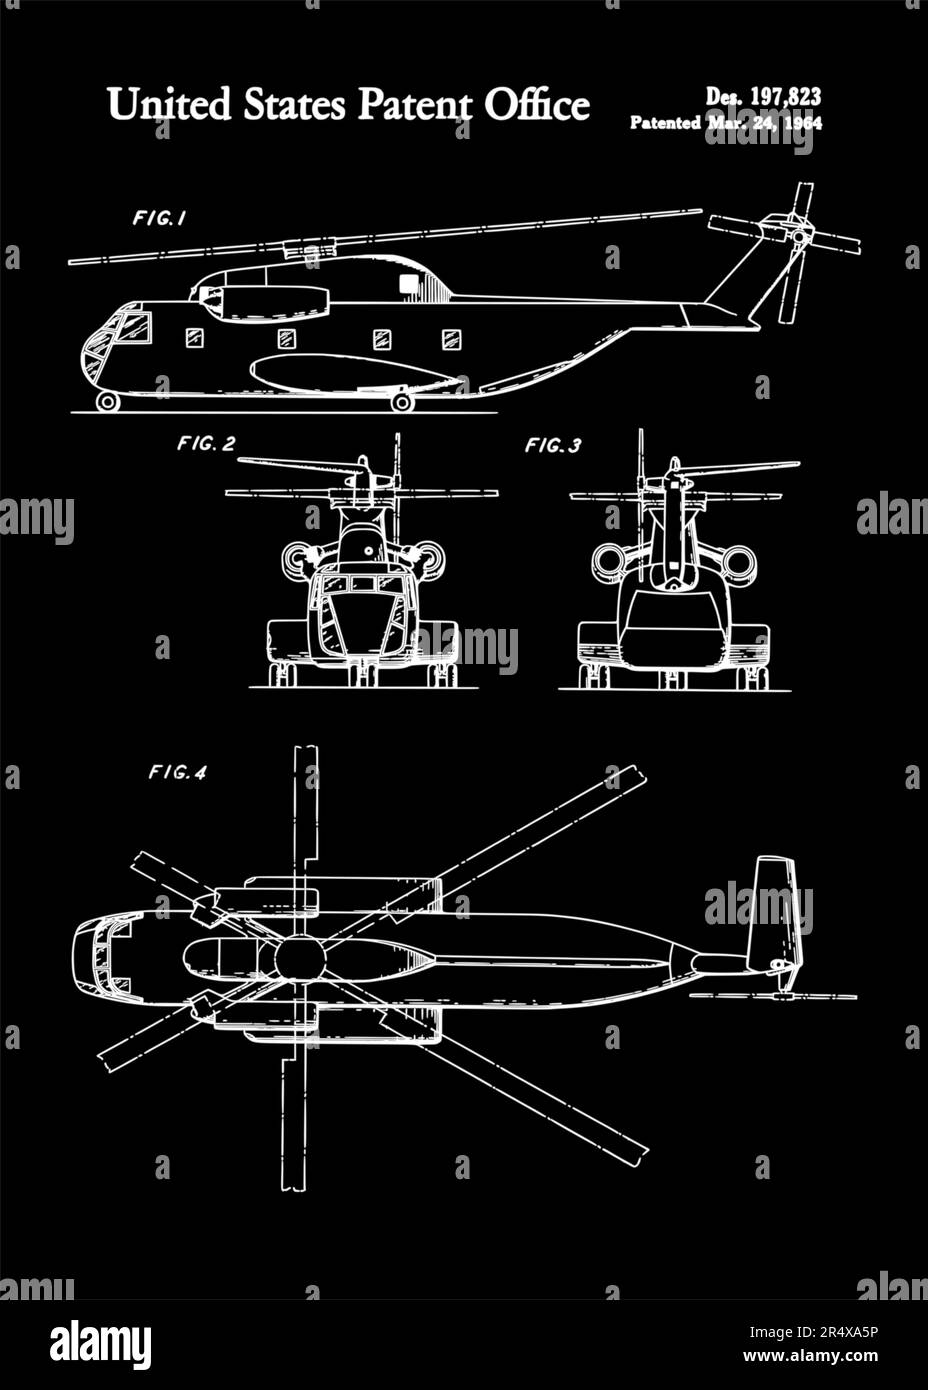 1964 vintage helicopter patent poster art Stock Vector